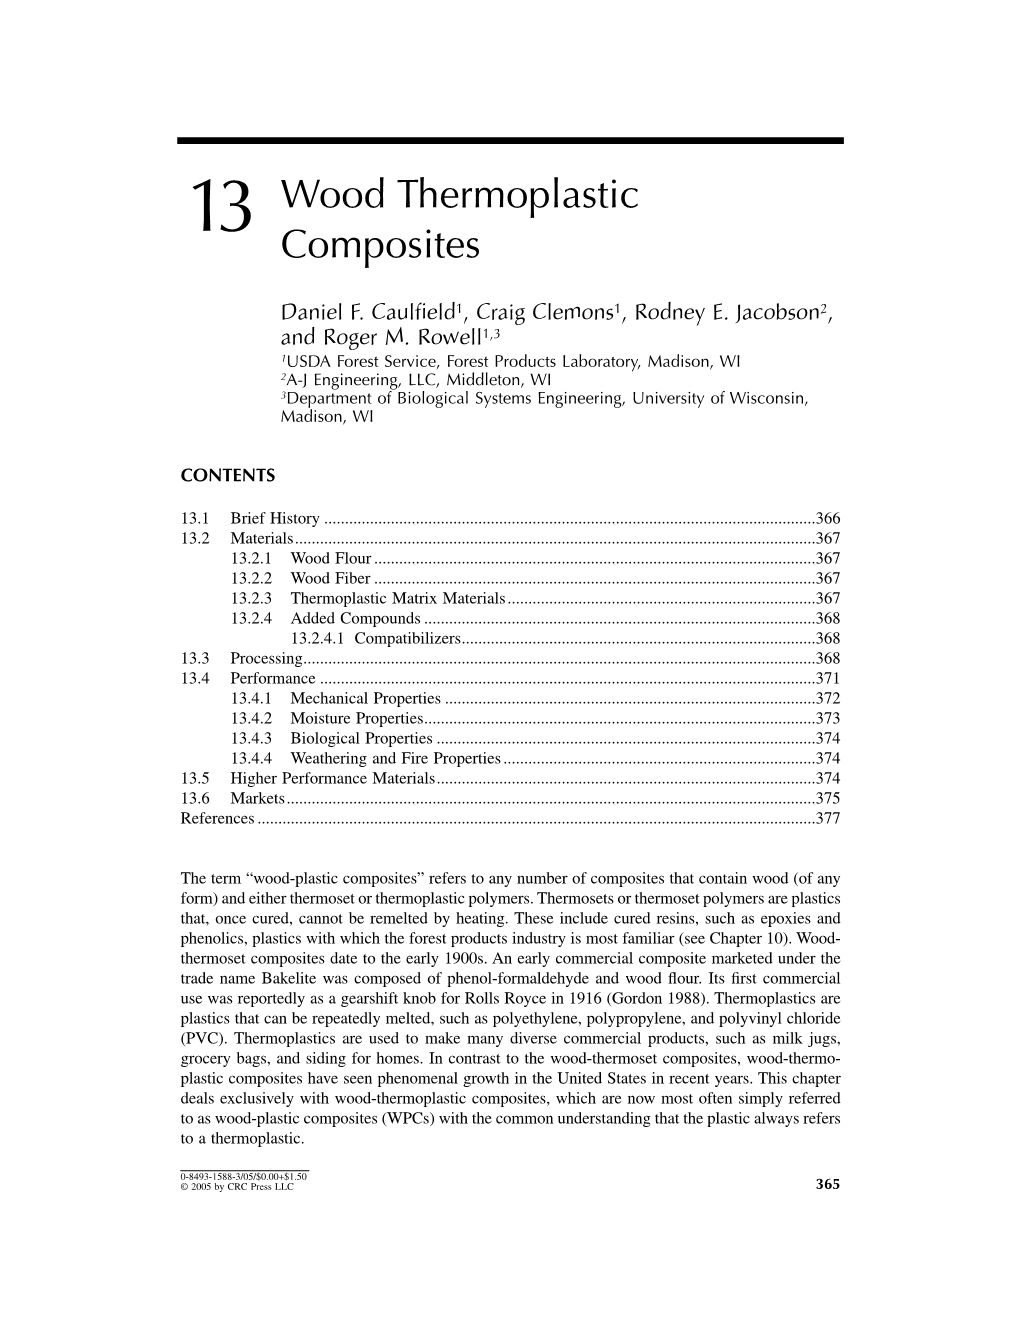 Wood Thermoplastic Composites Chapter 13